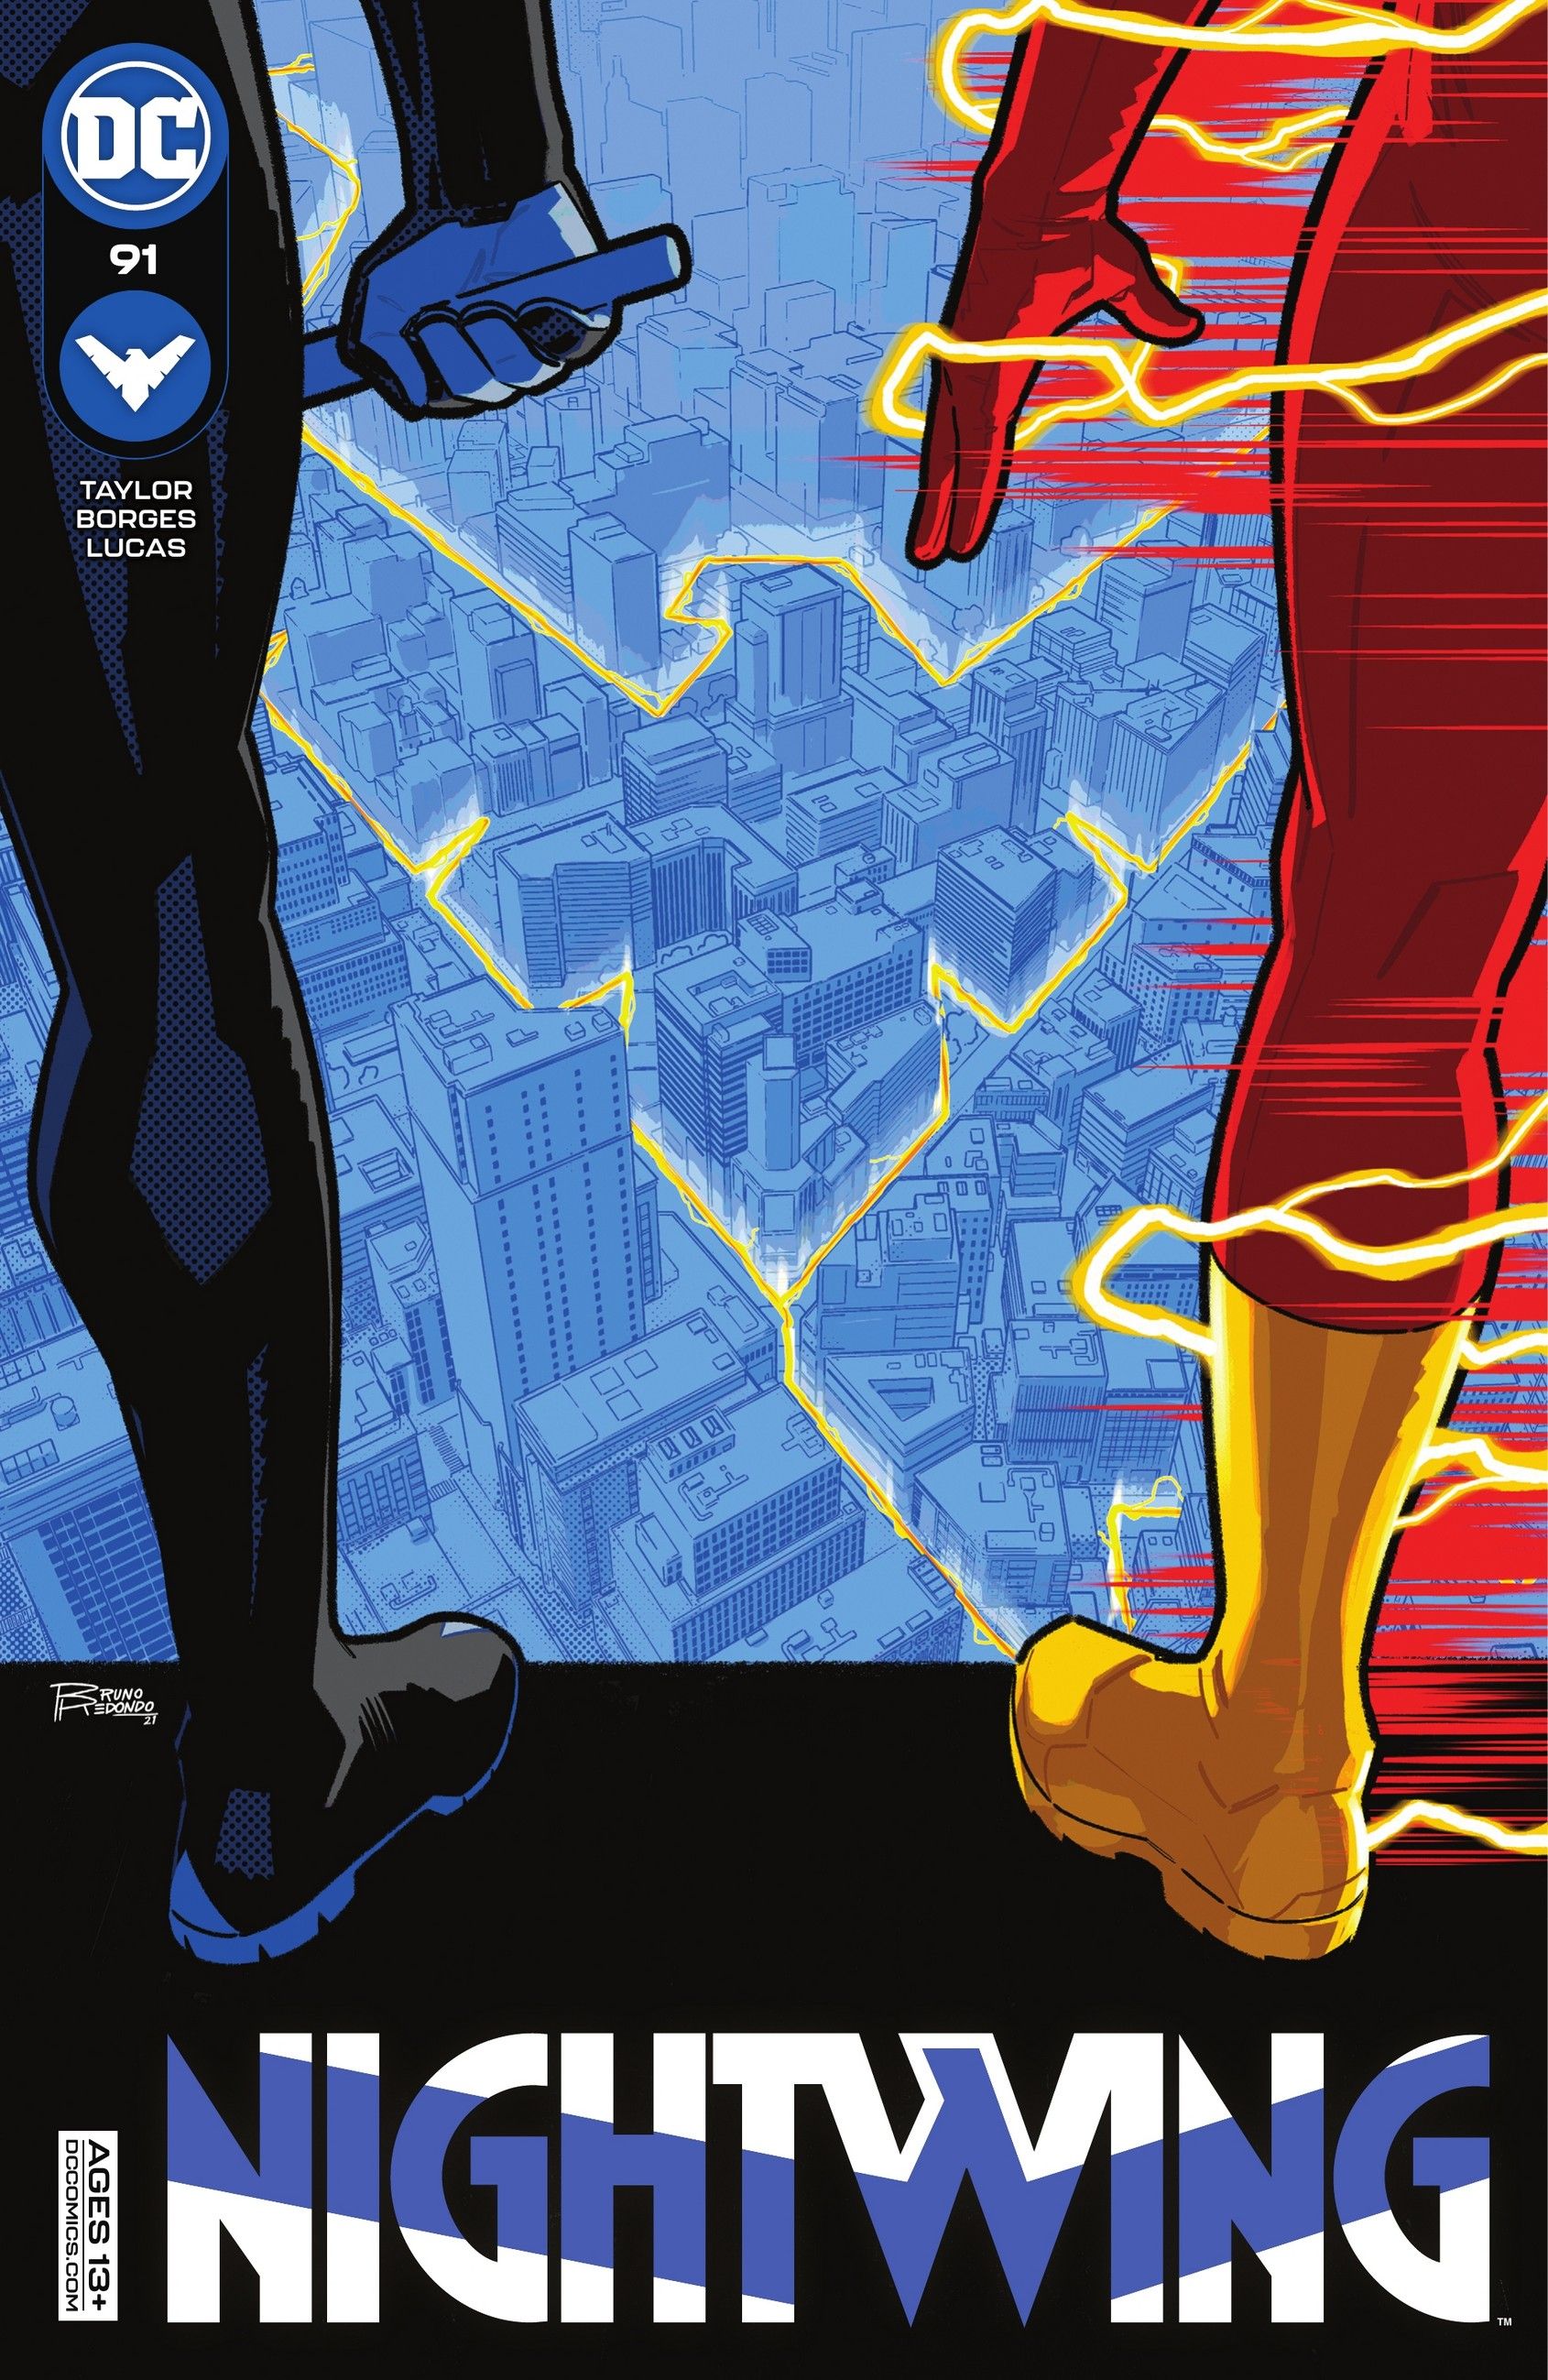 Cover of Nightwing #91 